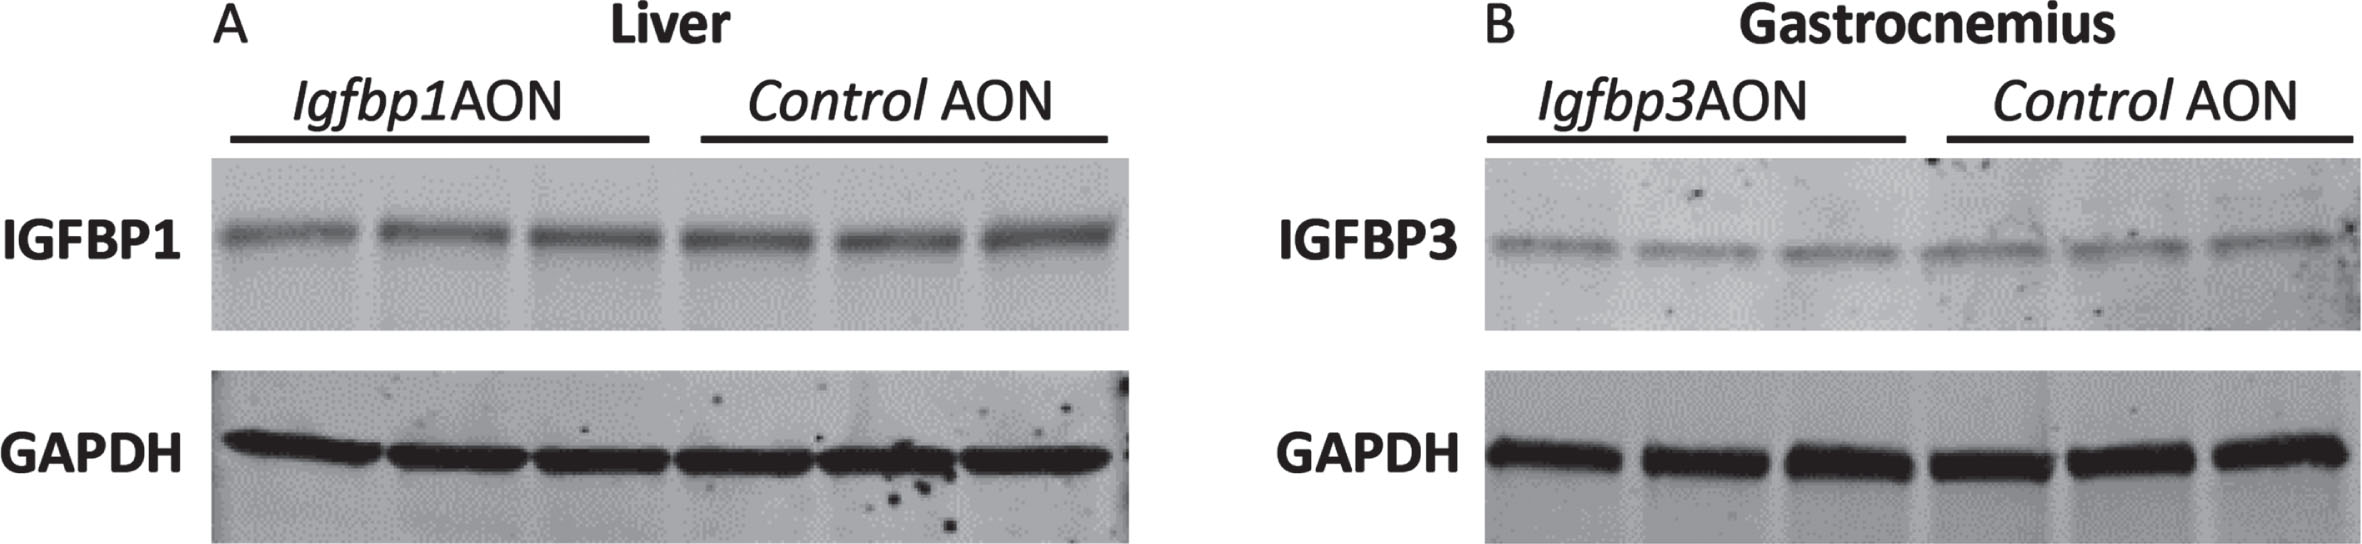 Western blot analysis of IGFBP1 and IGFBP3. A. Blot picture showing the IGFBP1 levels in Igfbp1AON treated cells compared to control AON treated cells. B. Blot picture showing the IGFBP3 levels in Igfbp3AON treated cells compared to control AON treated cells. GAPDH was used as loading control.